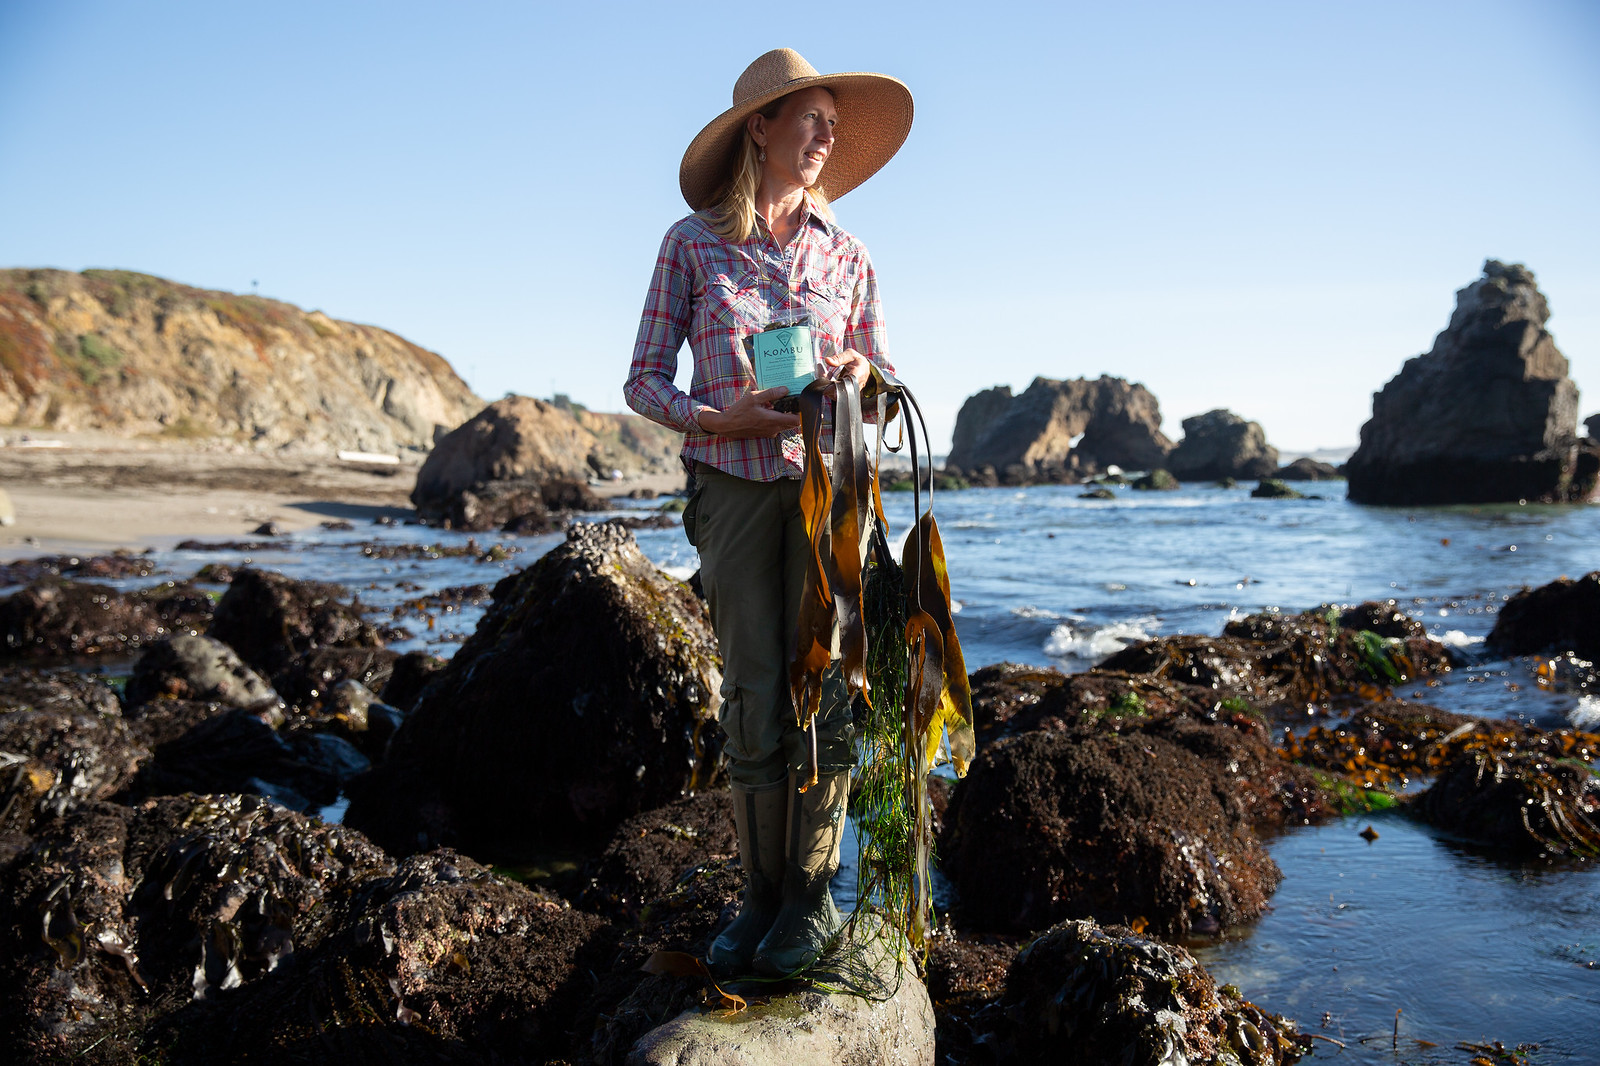 Heidi Herrmann has a commerical permit to harvest kombu and nori along the Sonoma Coast. She is involved in teaching others how to forage respectfully but doesn’t like to reveal too much about her favorite collecting sites. (Paige Green)